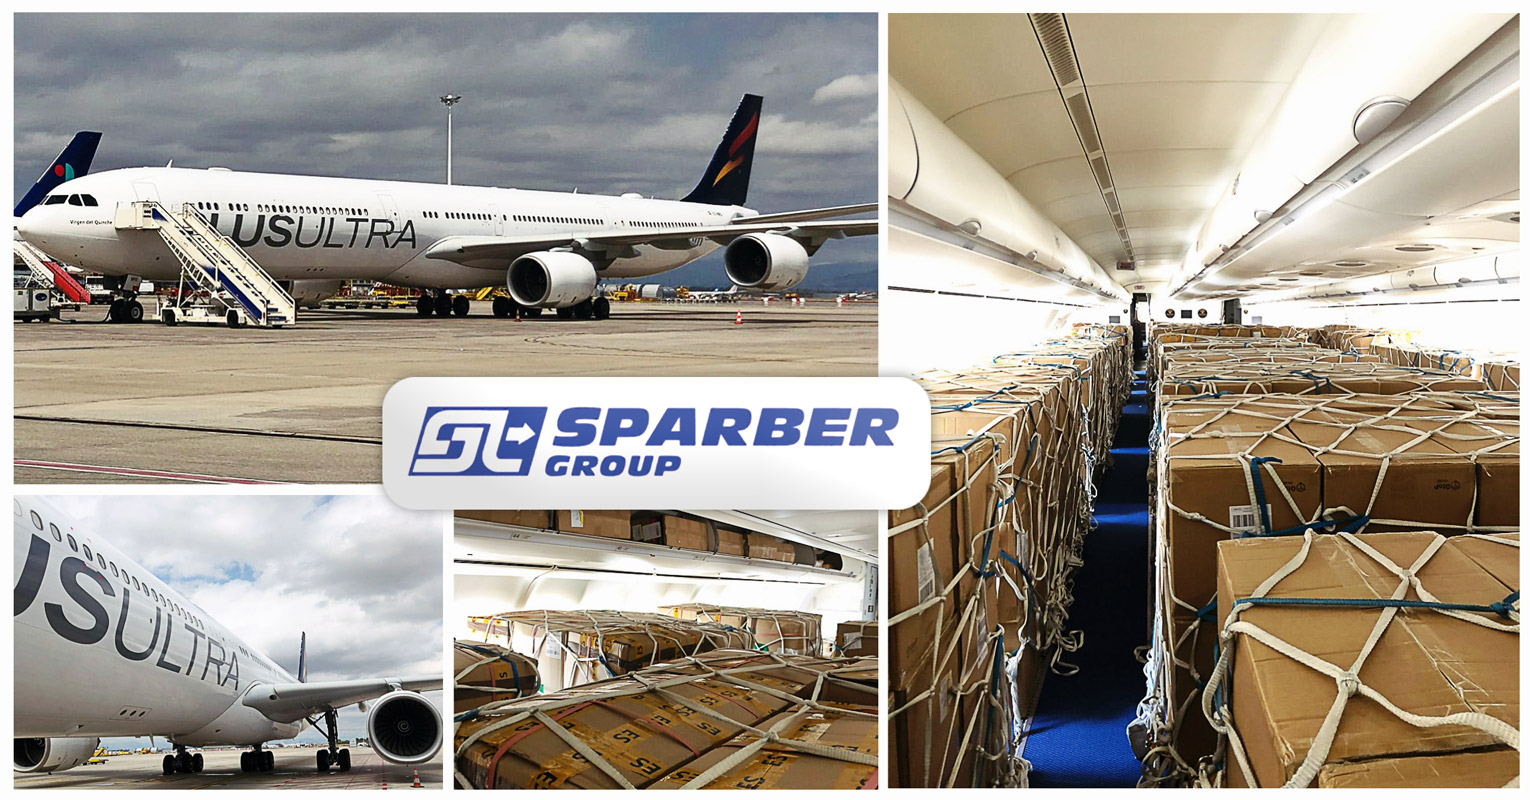 Sparber Handled 5 Full Air Charters from China (PVG & CTU) to Madrid